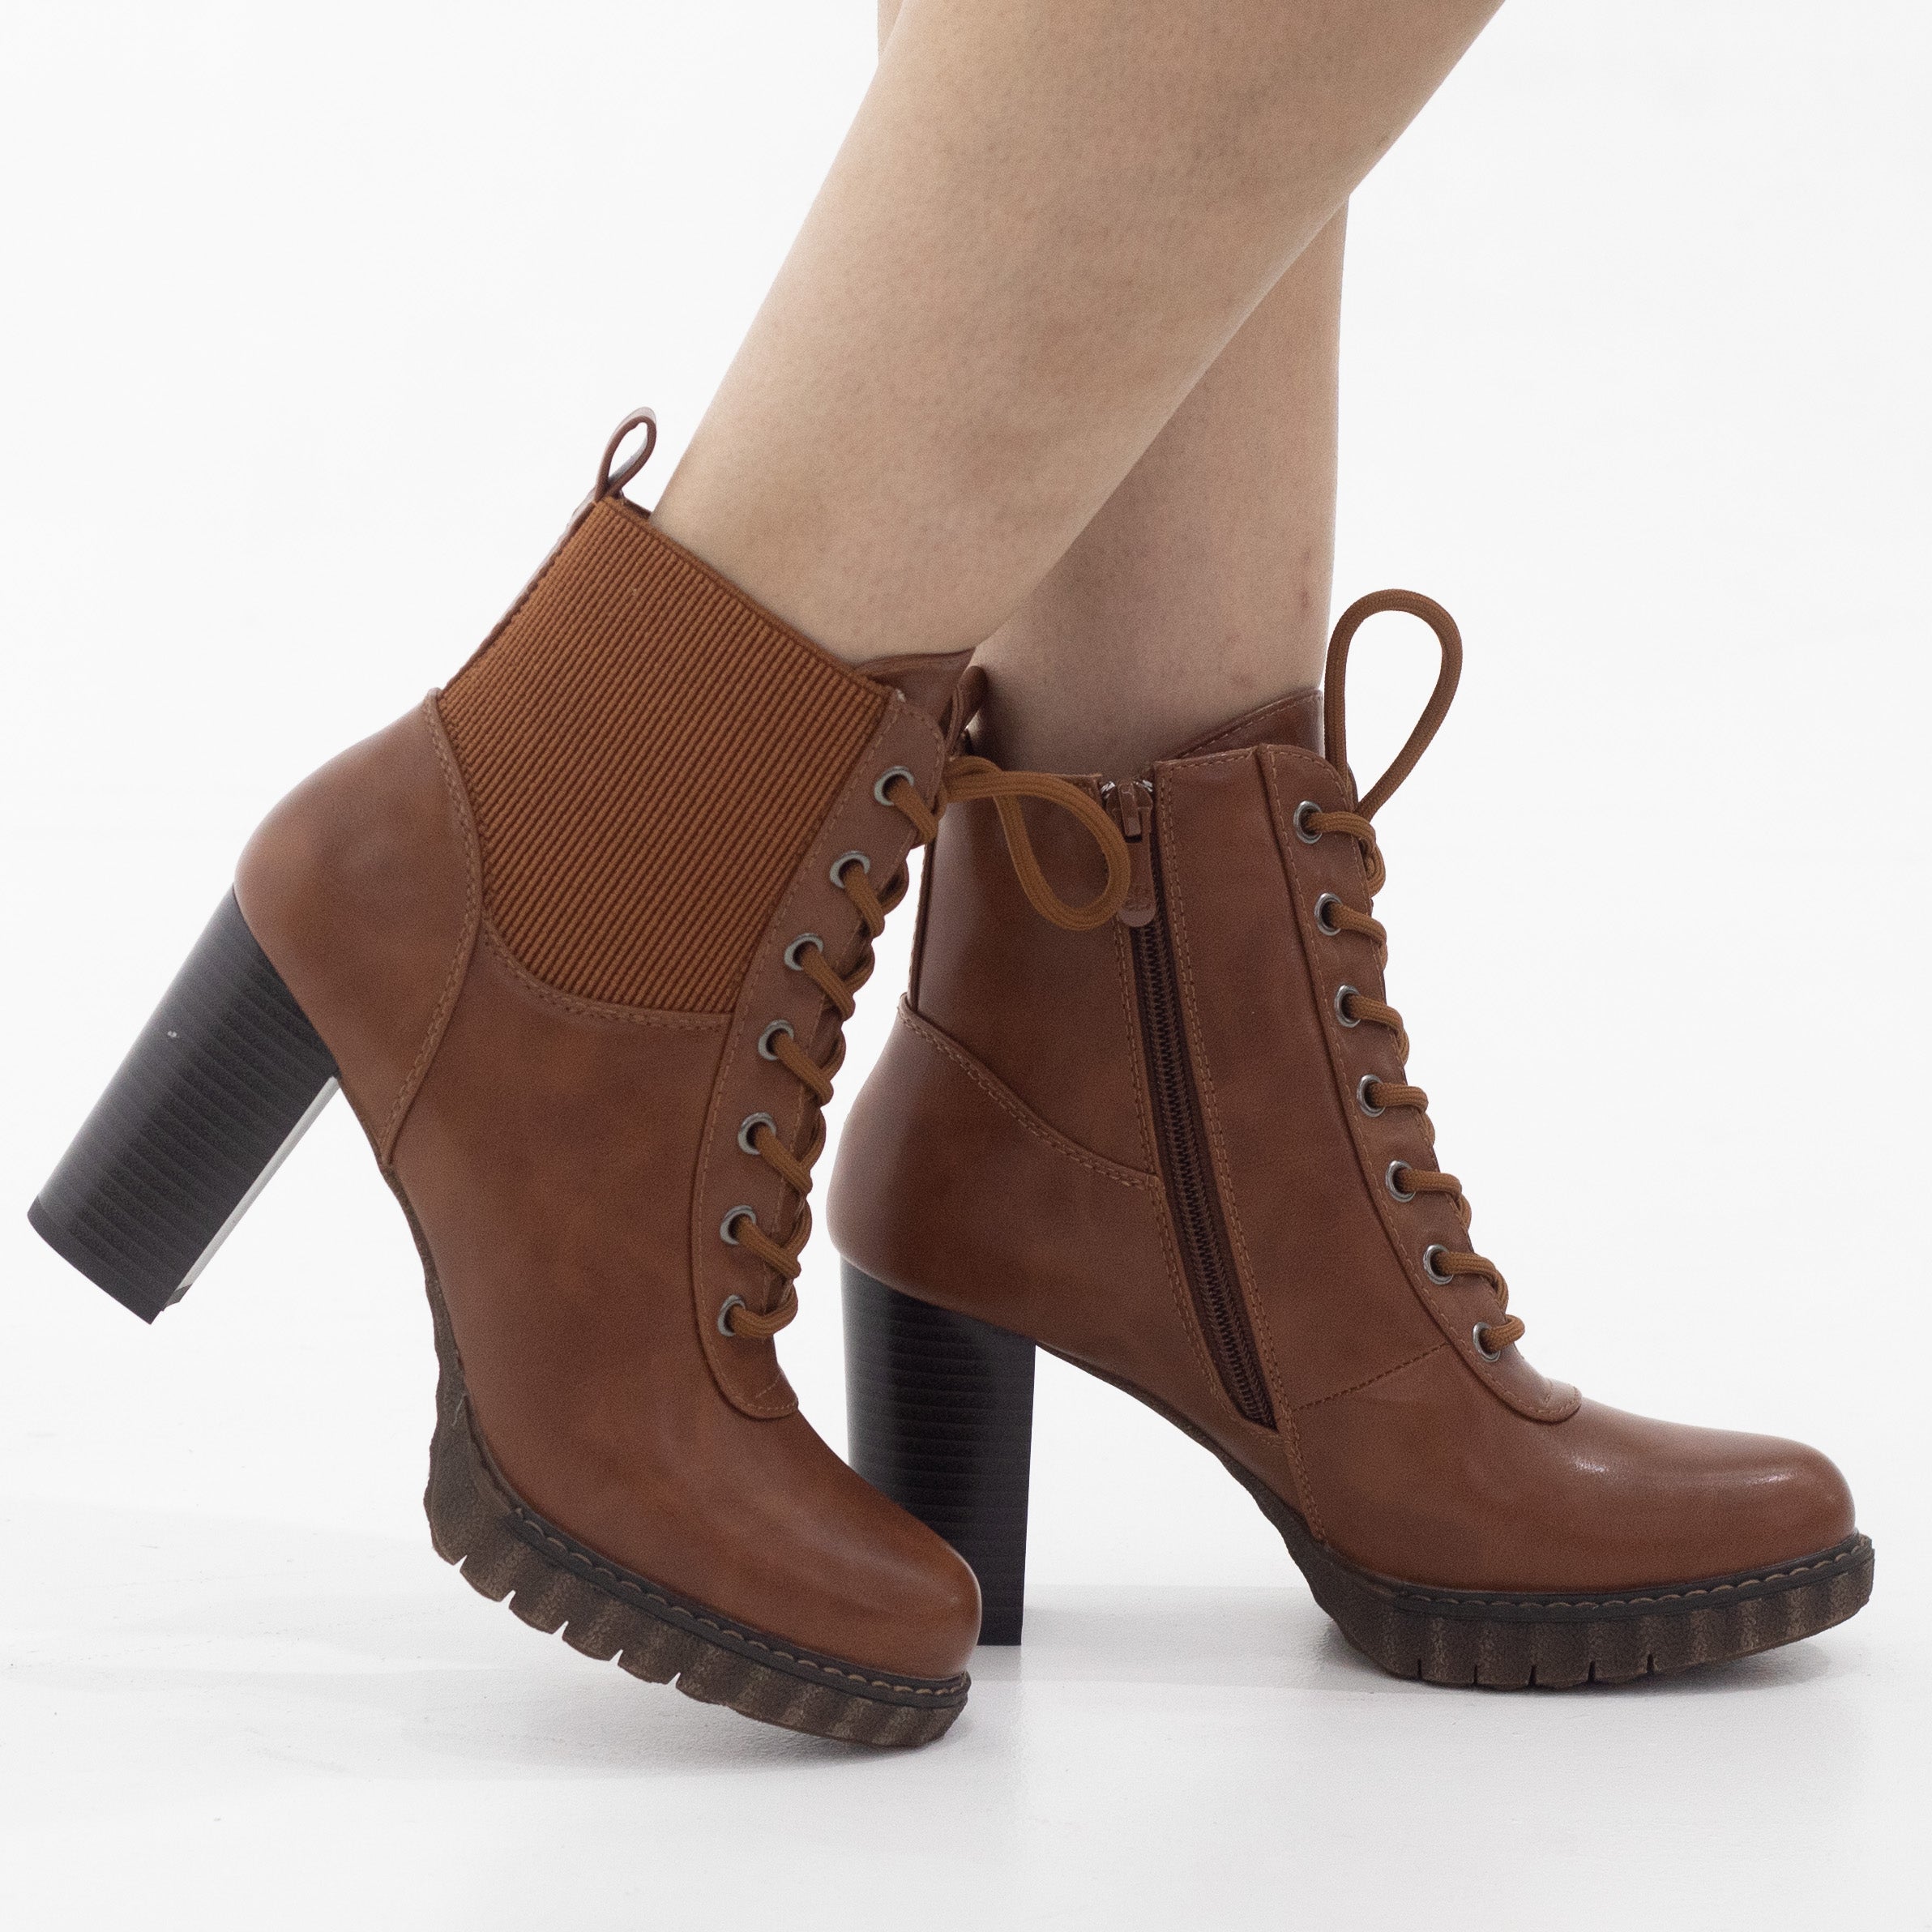 Tan 8.5cm heel lace up ankle boot zelle